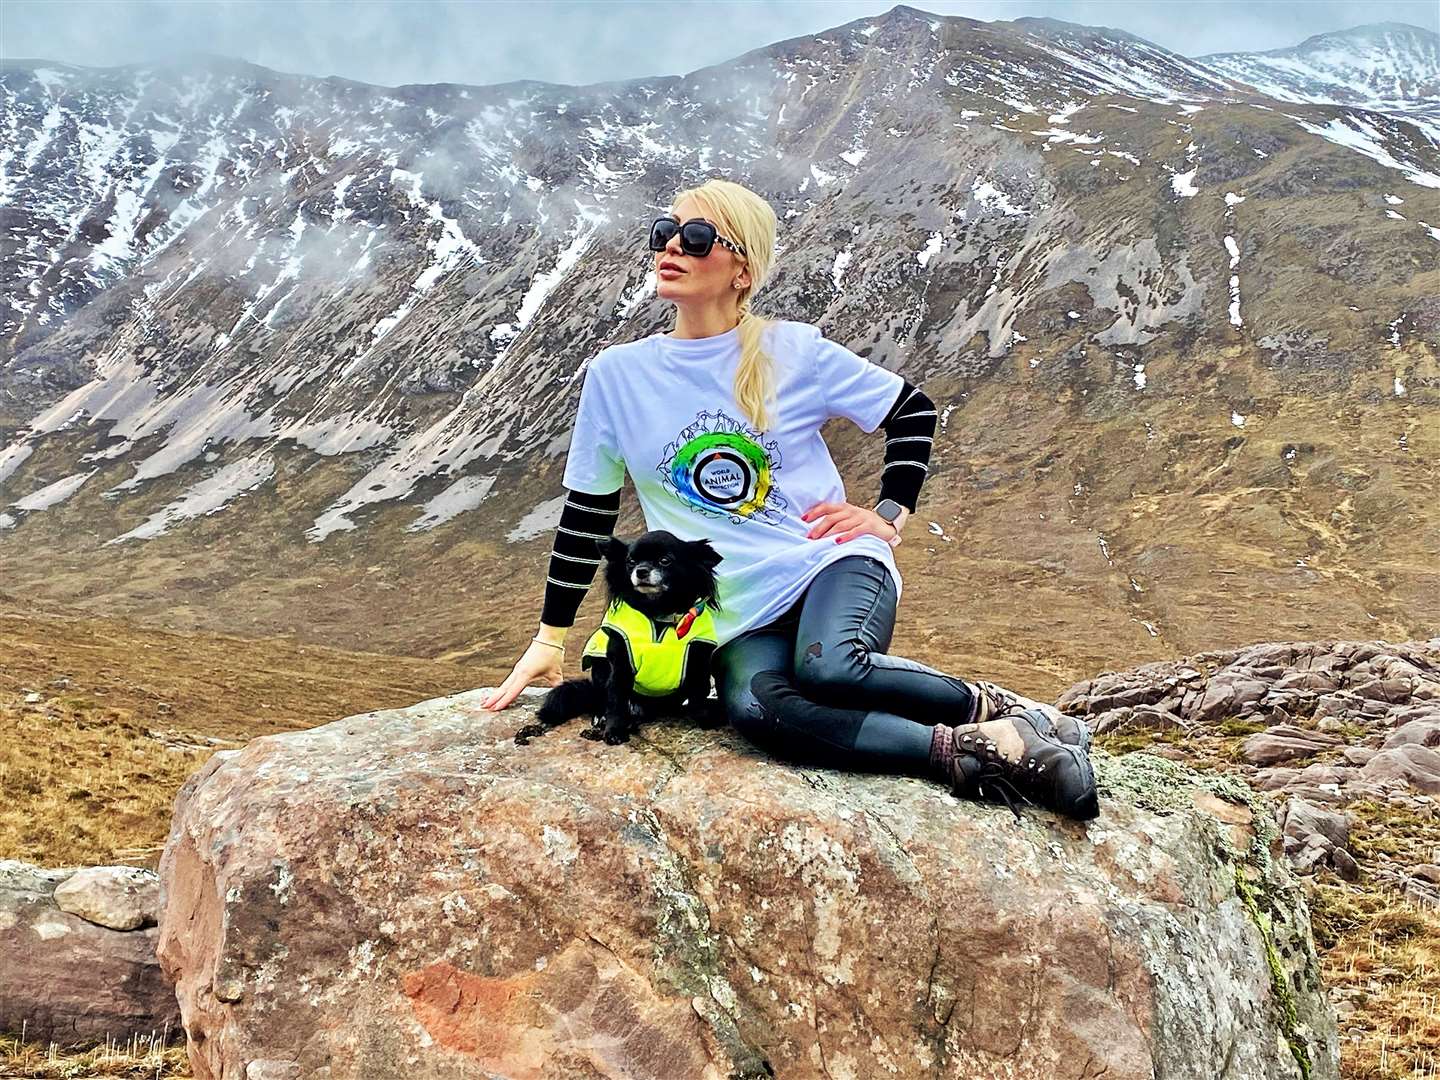 Natalie and her dog Louis climbed Beinn Eighe for the Animal Protection charity.